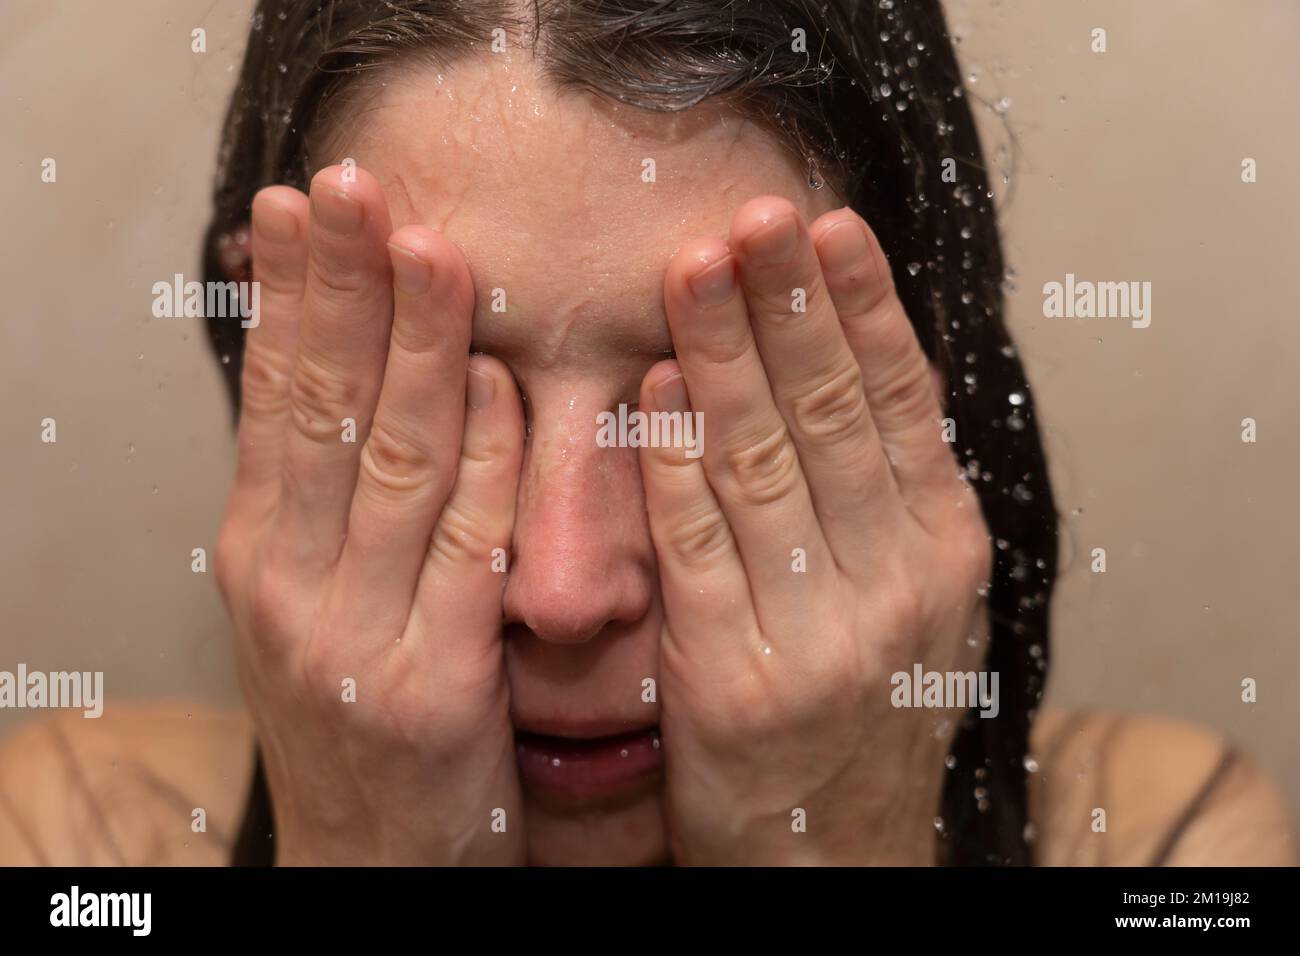 Young woman in shower with her head in her hands. Concept: feeling depressed, bullying victim, bipolar disorder, suicidal, burnout, feeling exhausted Stock Photo